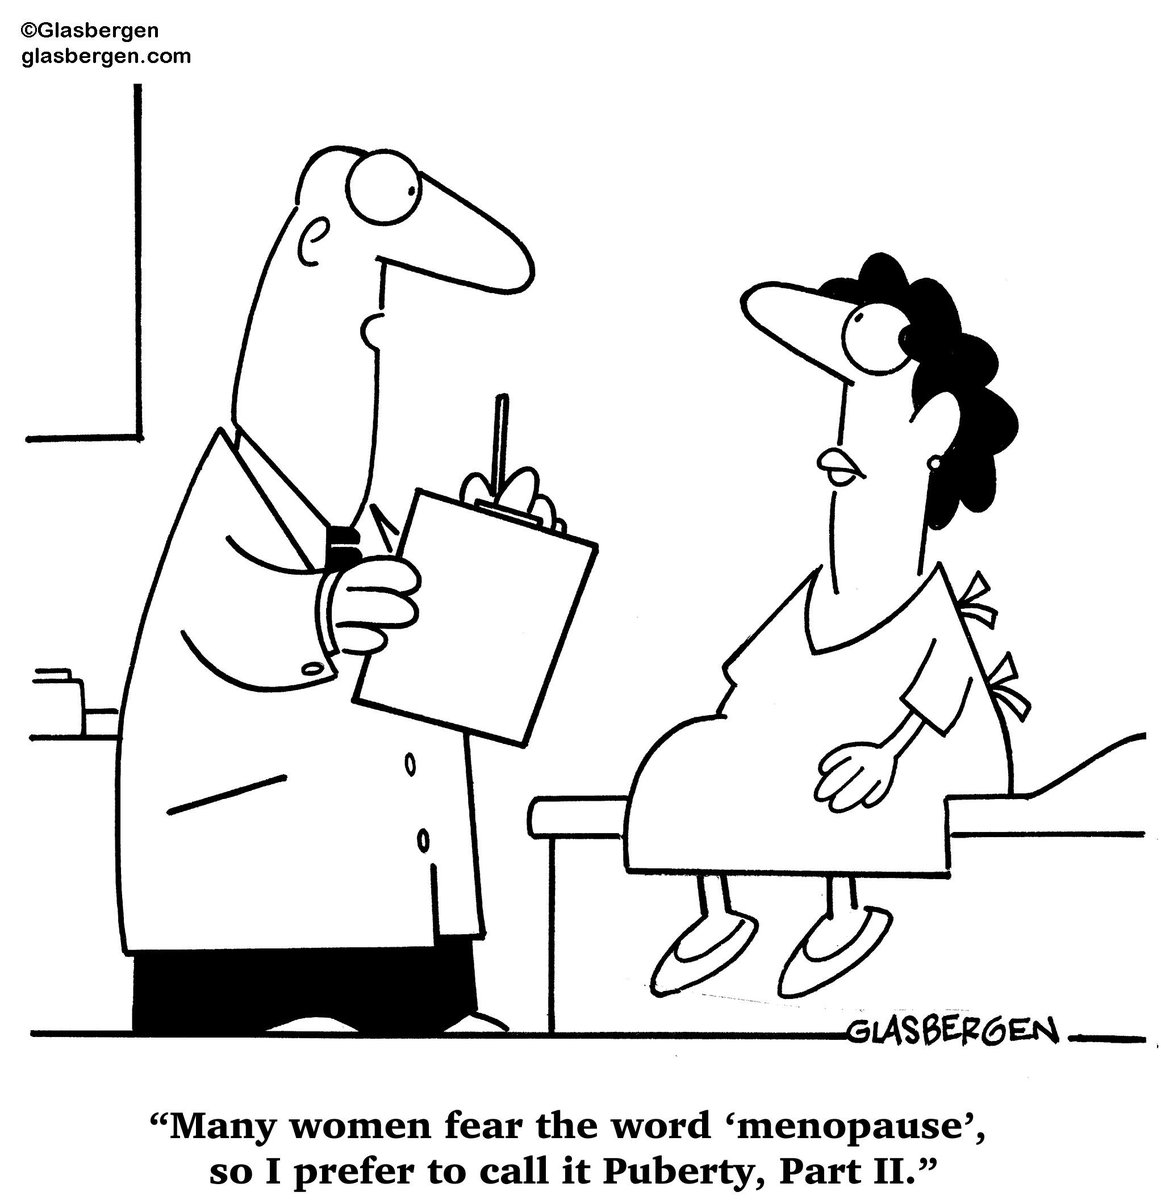 “#Menopause. A pause while you reconsider men.” – Margaret Atwood

Ready for more medical #humor? Head here: buff.ly/445jRng

#OBTwitter #ObgynTwitter #Perimenopause #SomeDocs